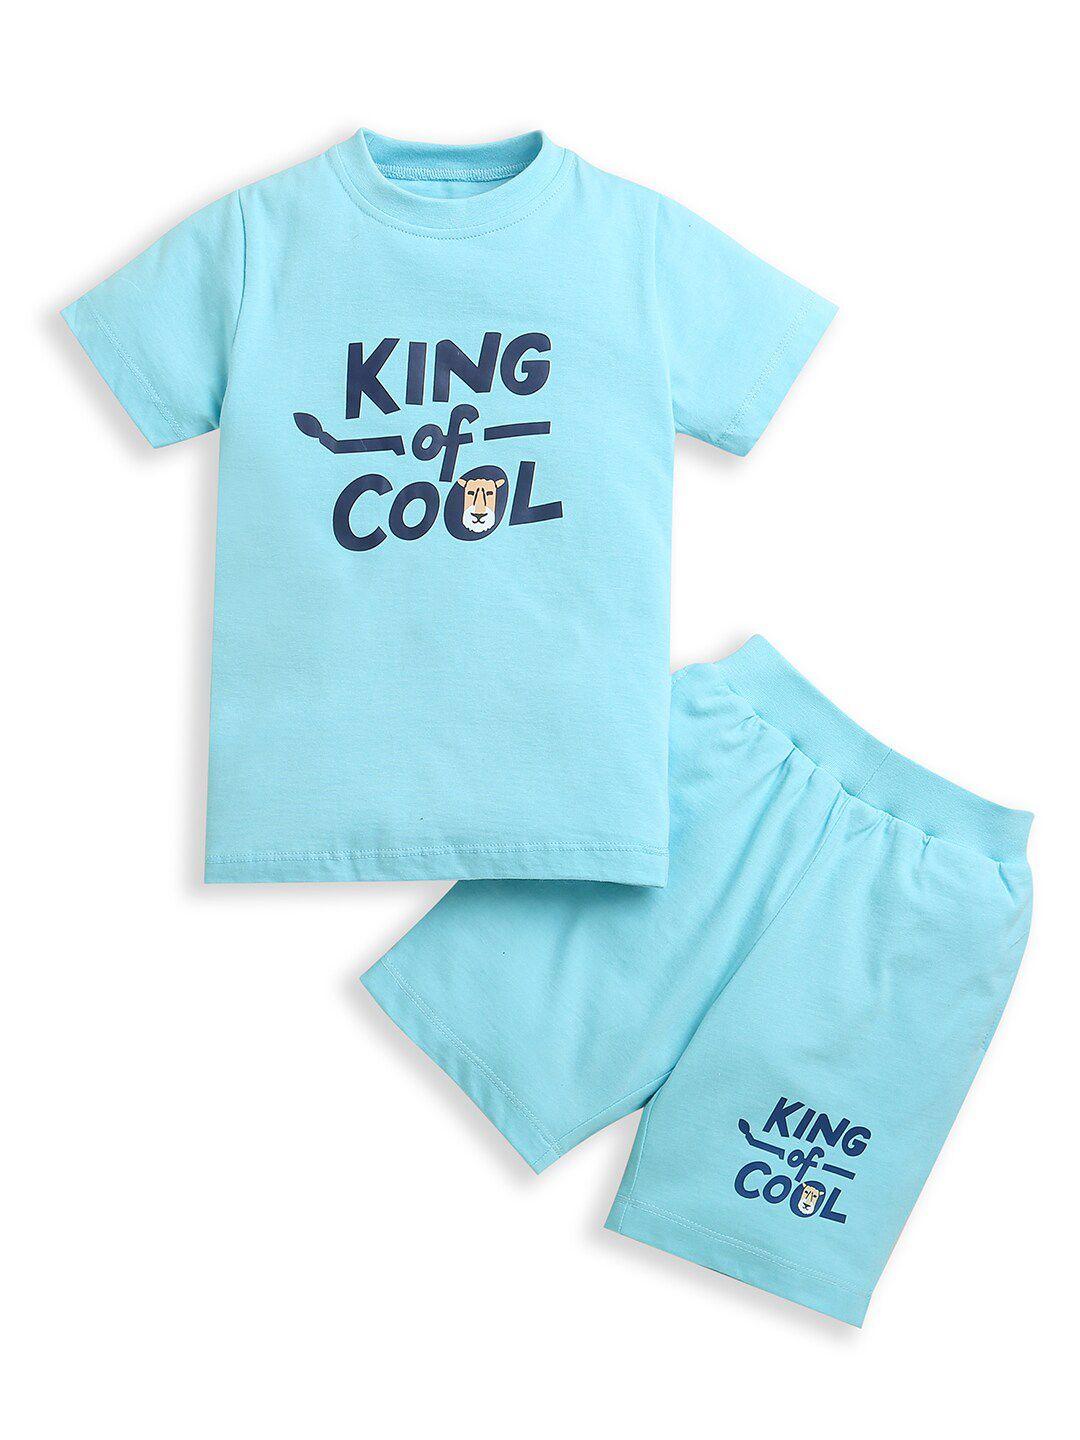 zip zap zoop boys printed t-shirt with shorts